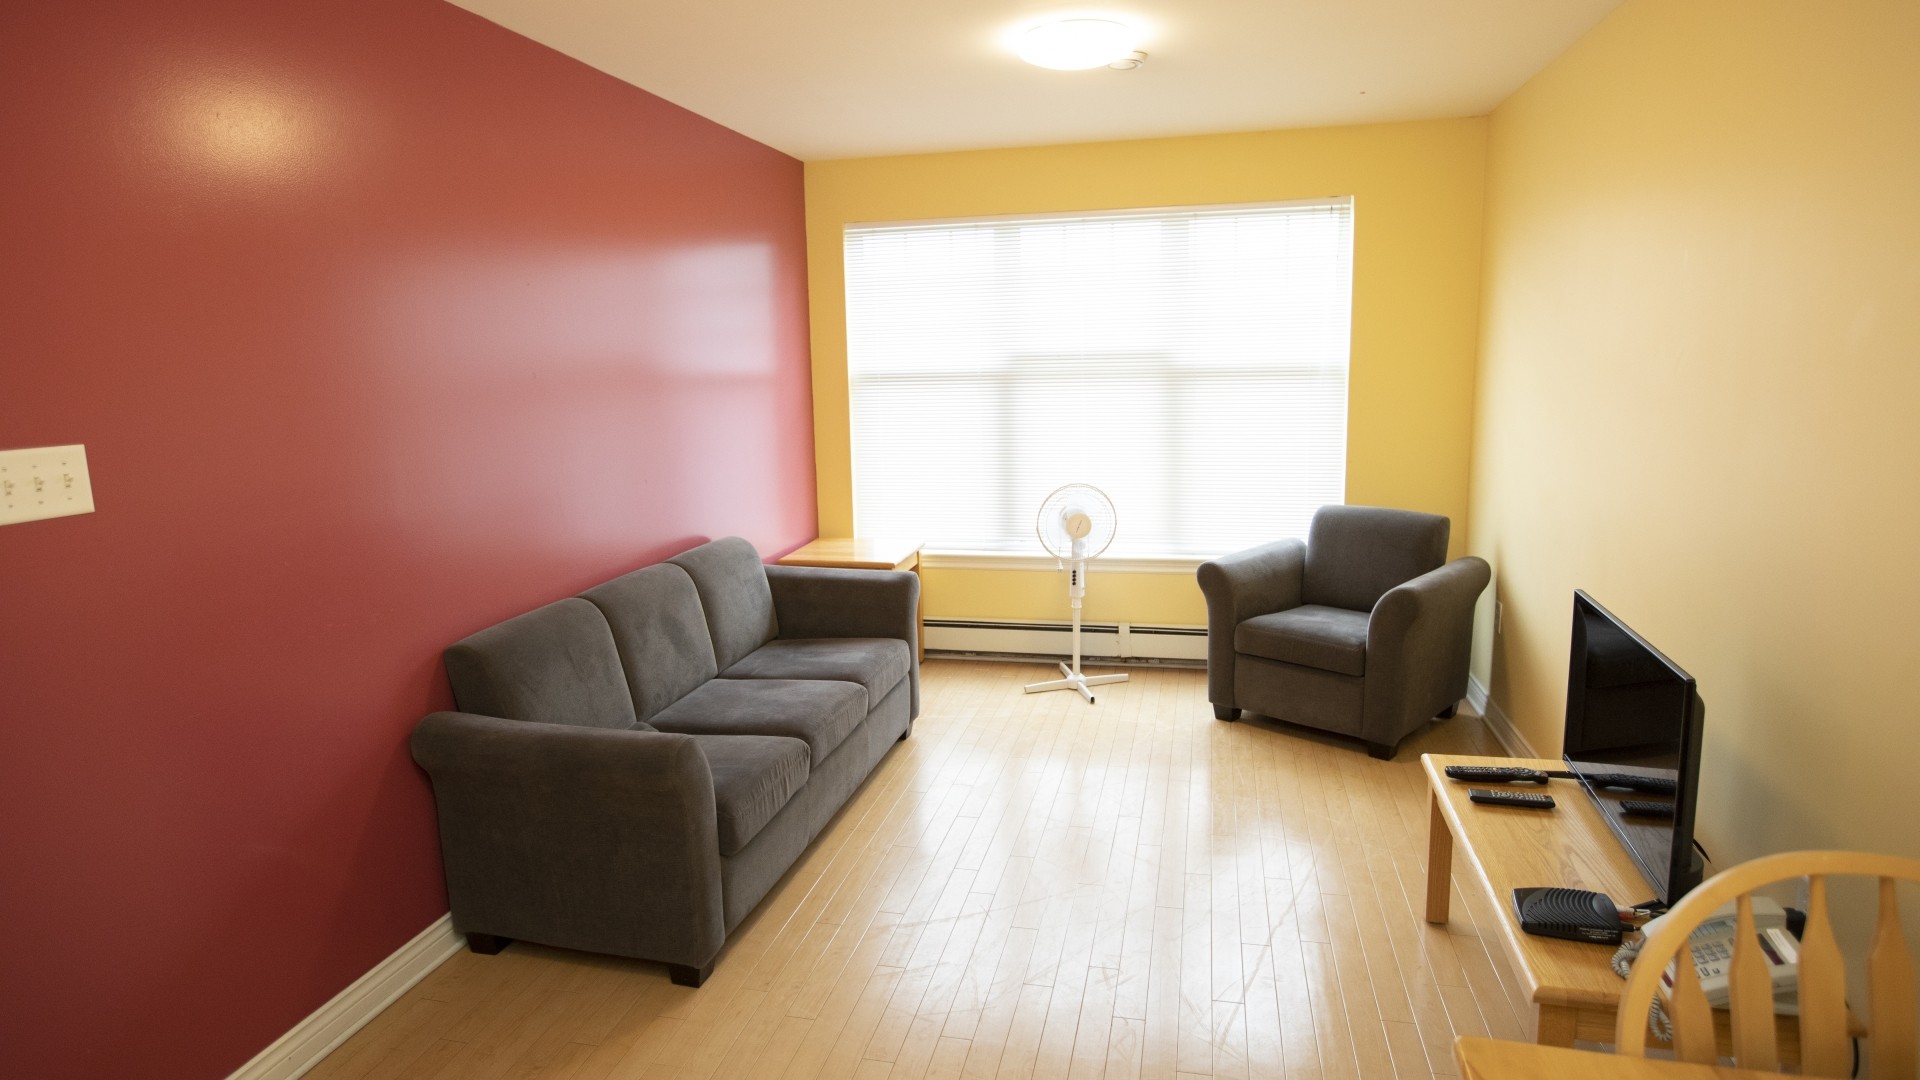 Lounge area of an apartment style room located in Powers and Somers Hall. There is a TV, along with a couch and a pedestal fan in front of the window.